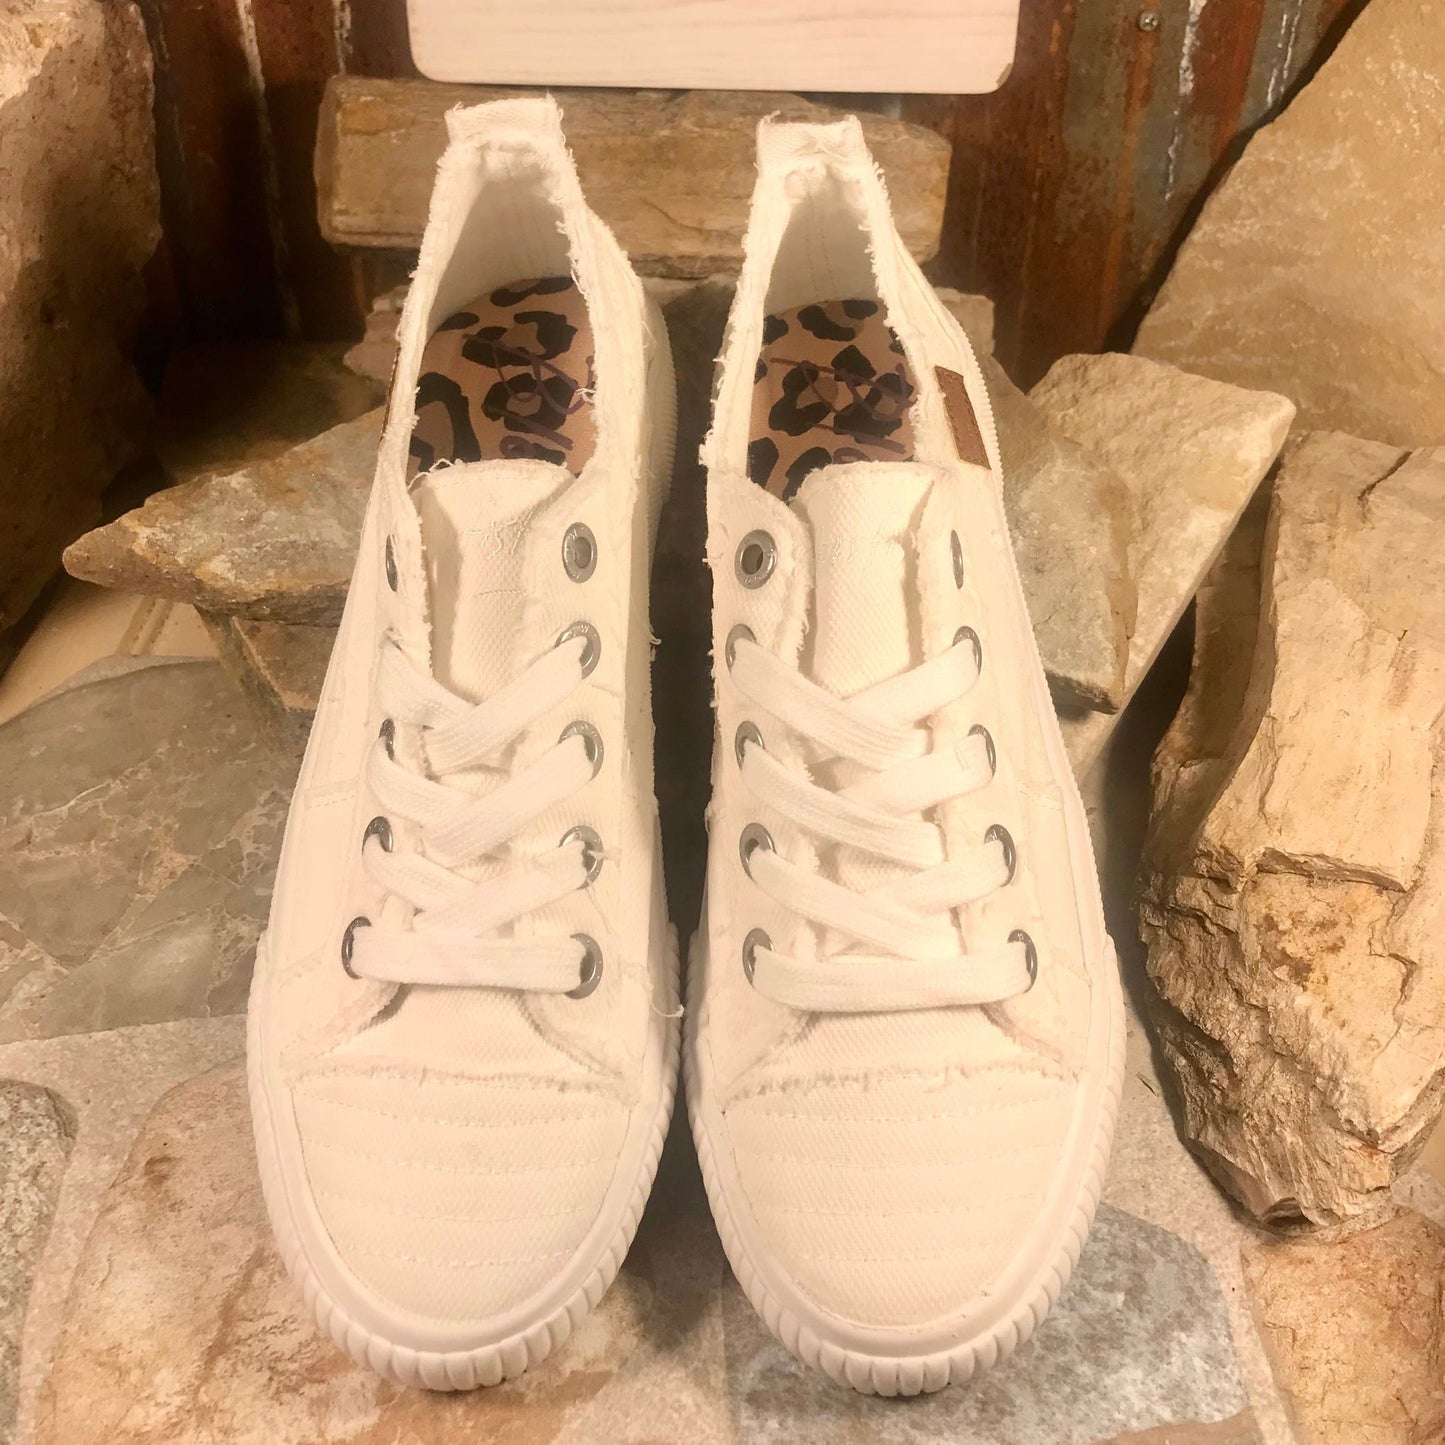 Clay Smoked Canvas Sneaker